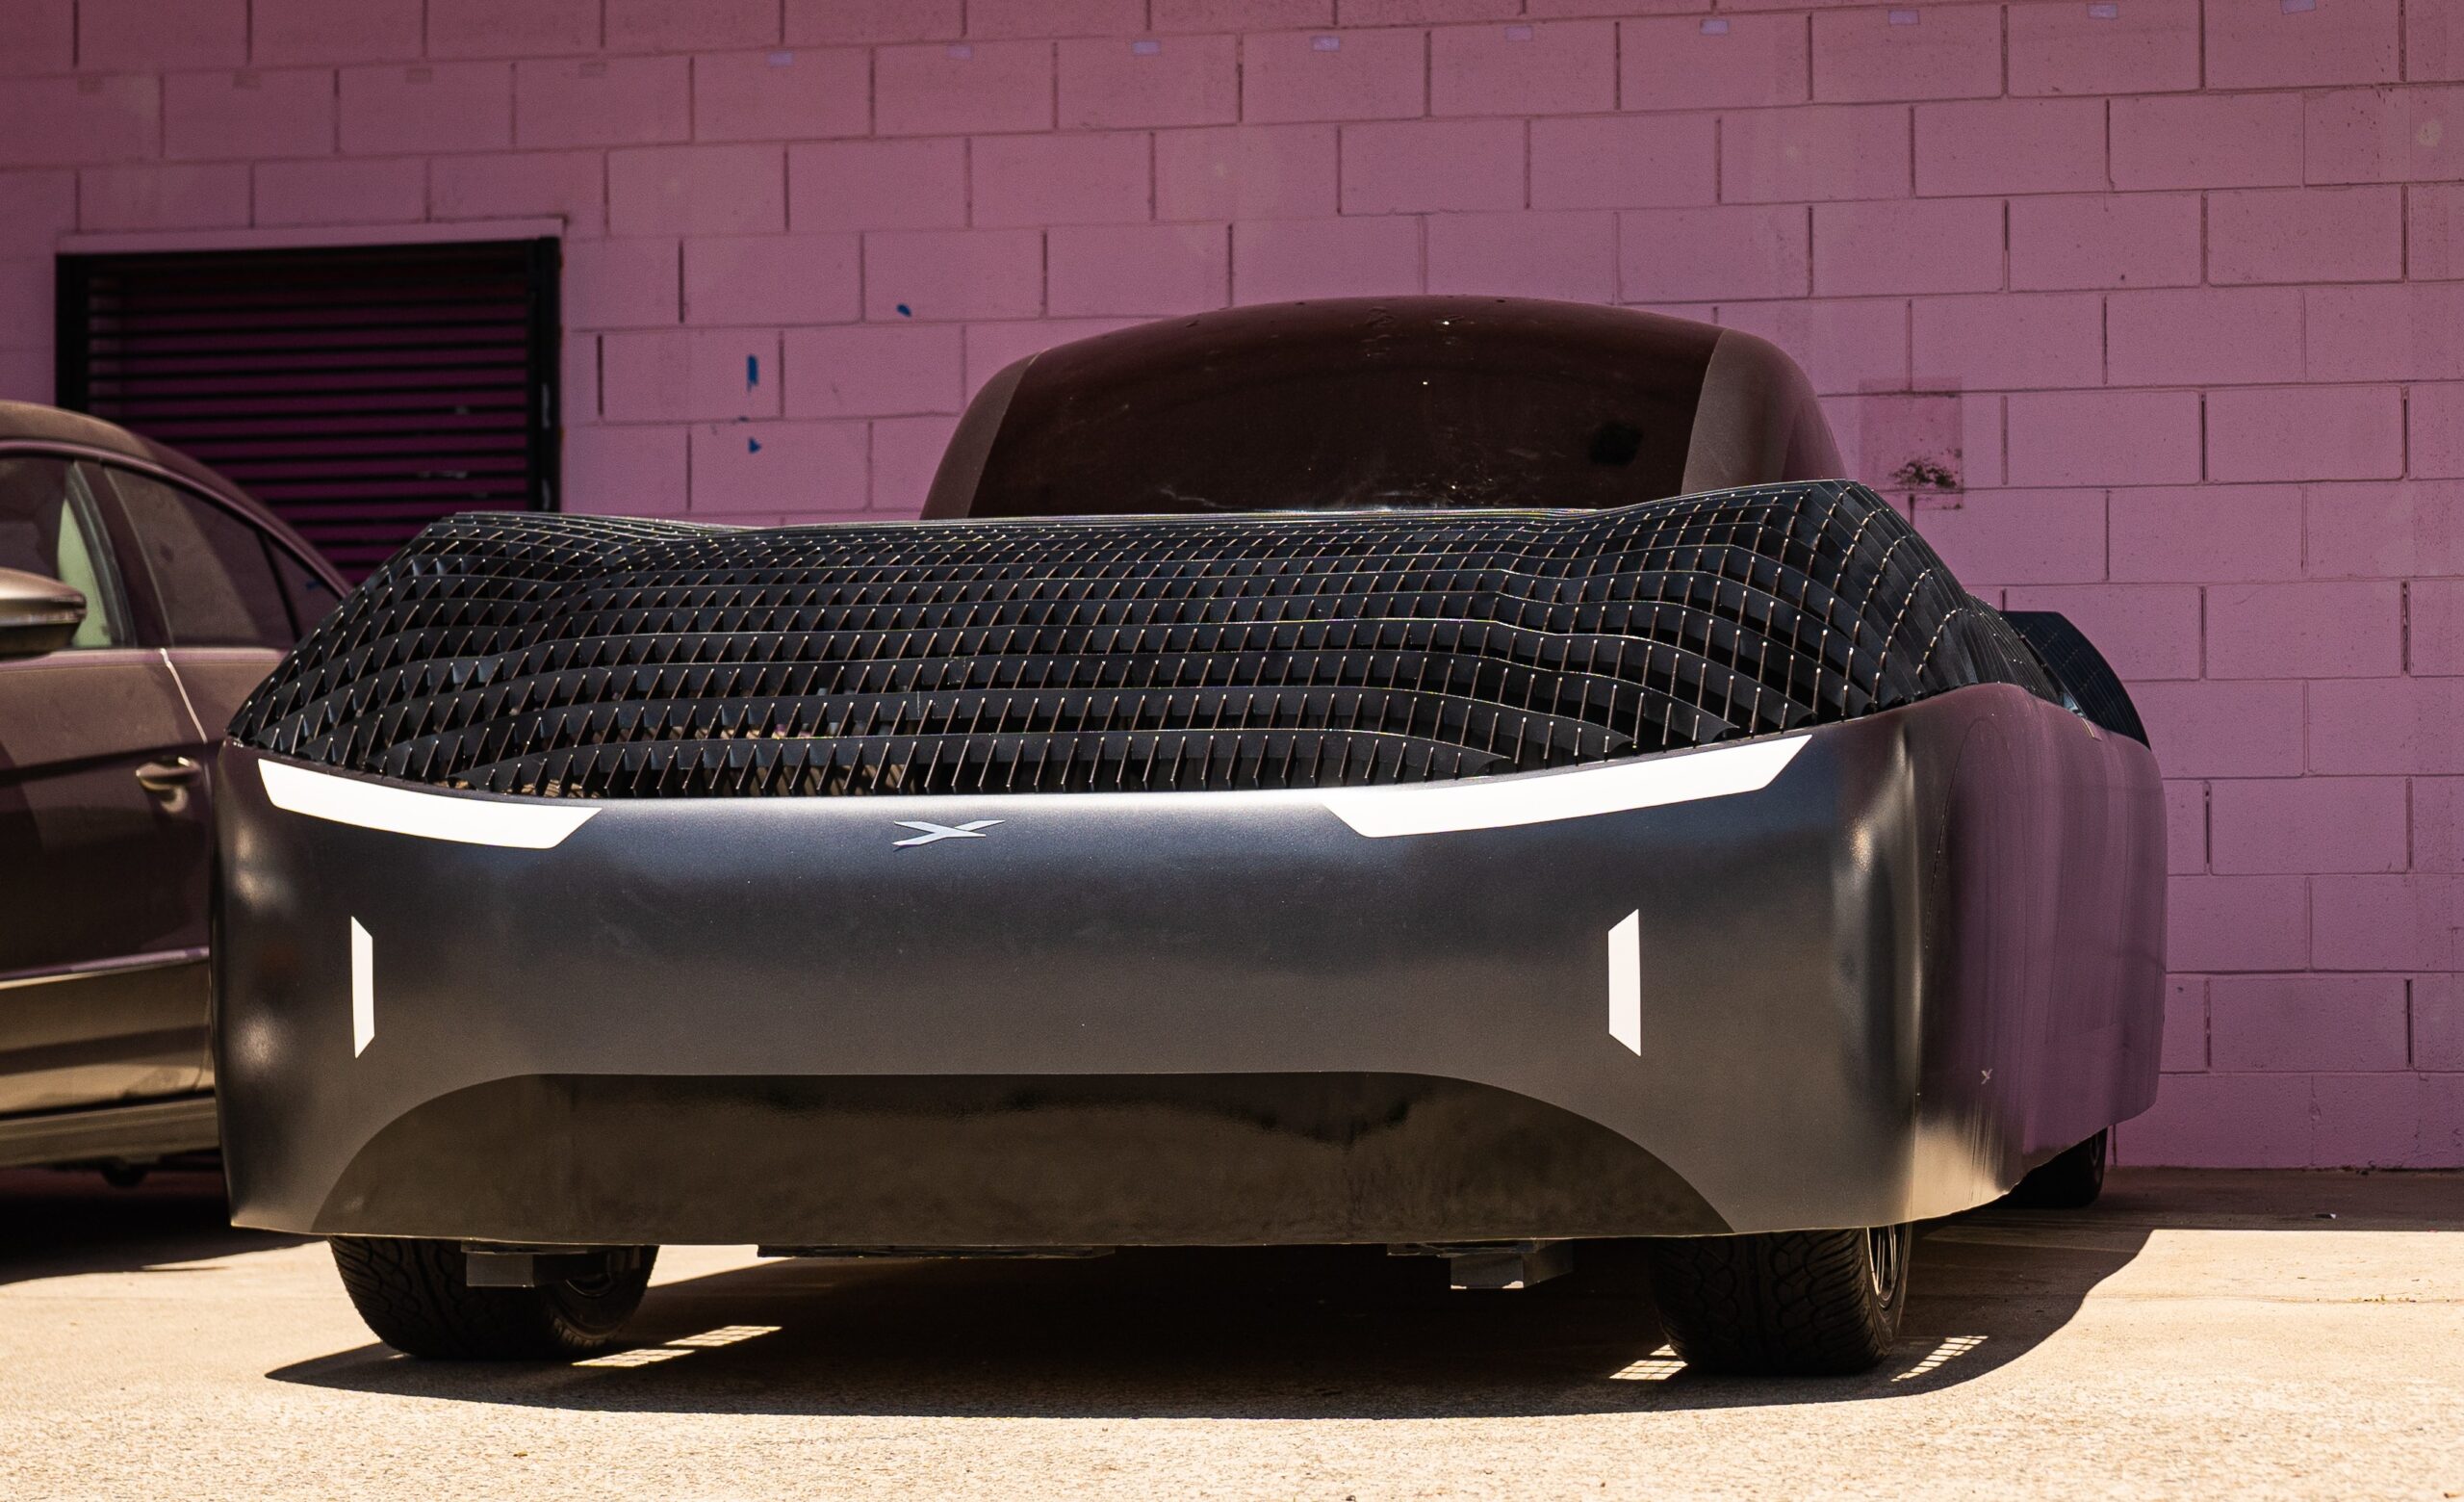 Have You Pre-Ordered This $300,000 Flying Car? - CleanTechnica